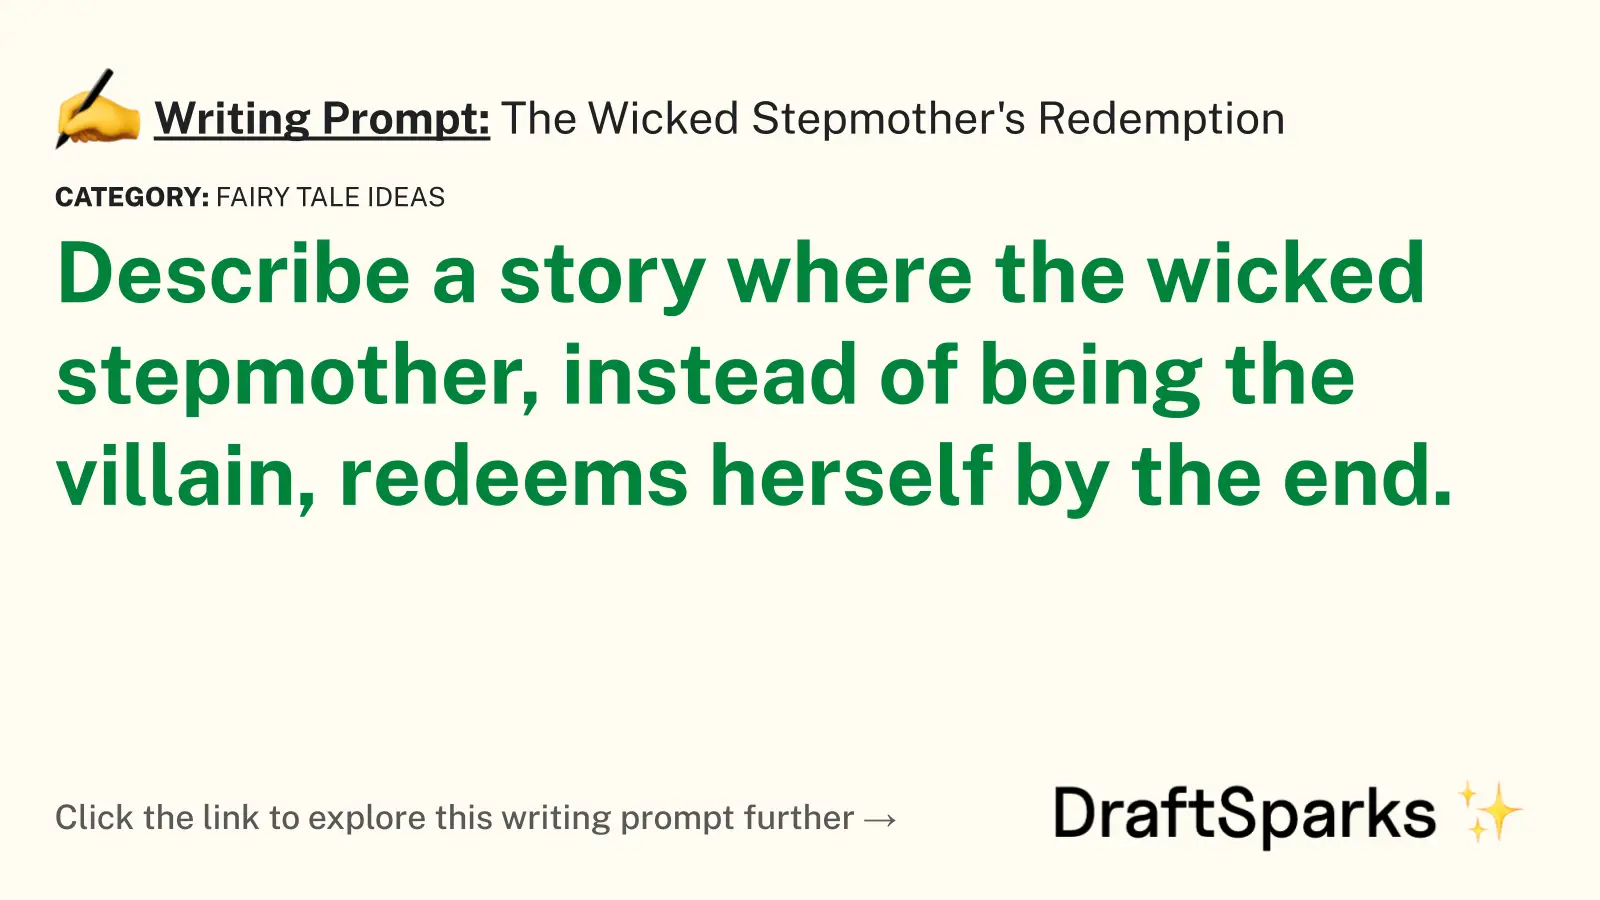 The Wicked Stepmother’s Redemption